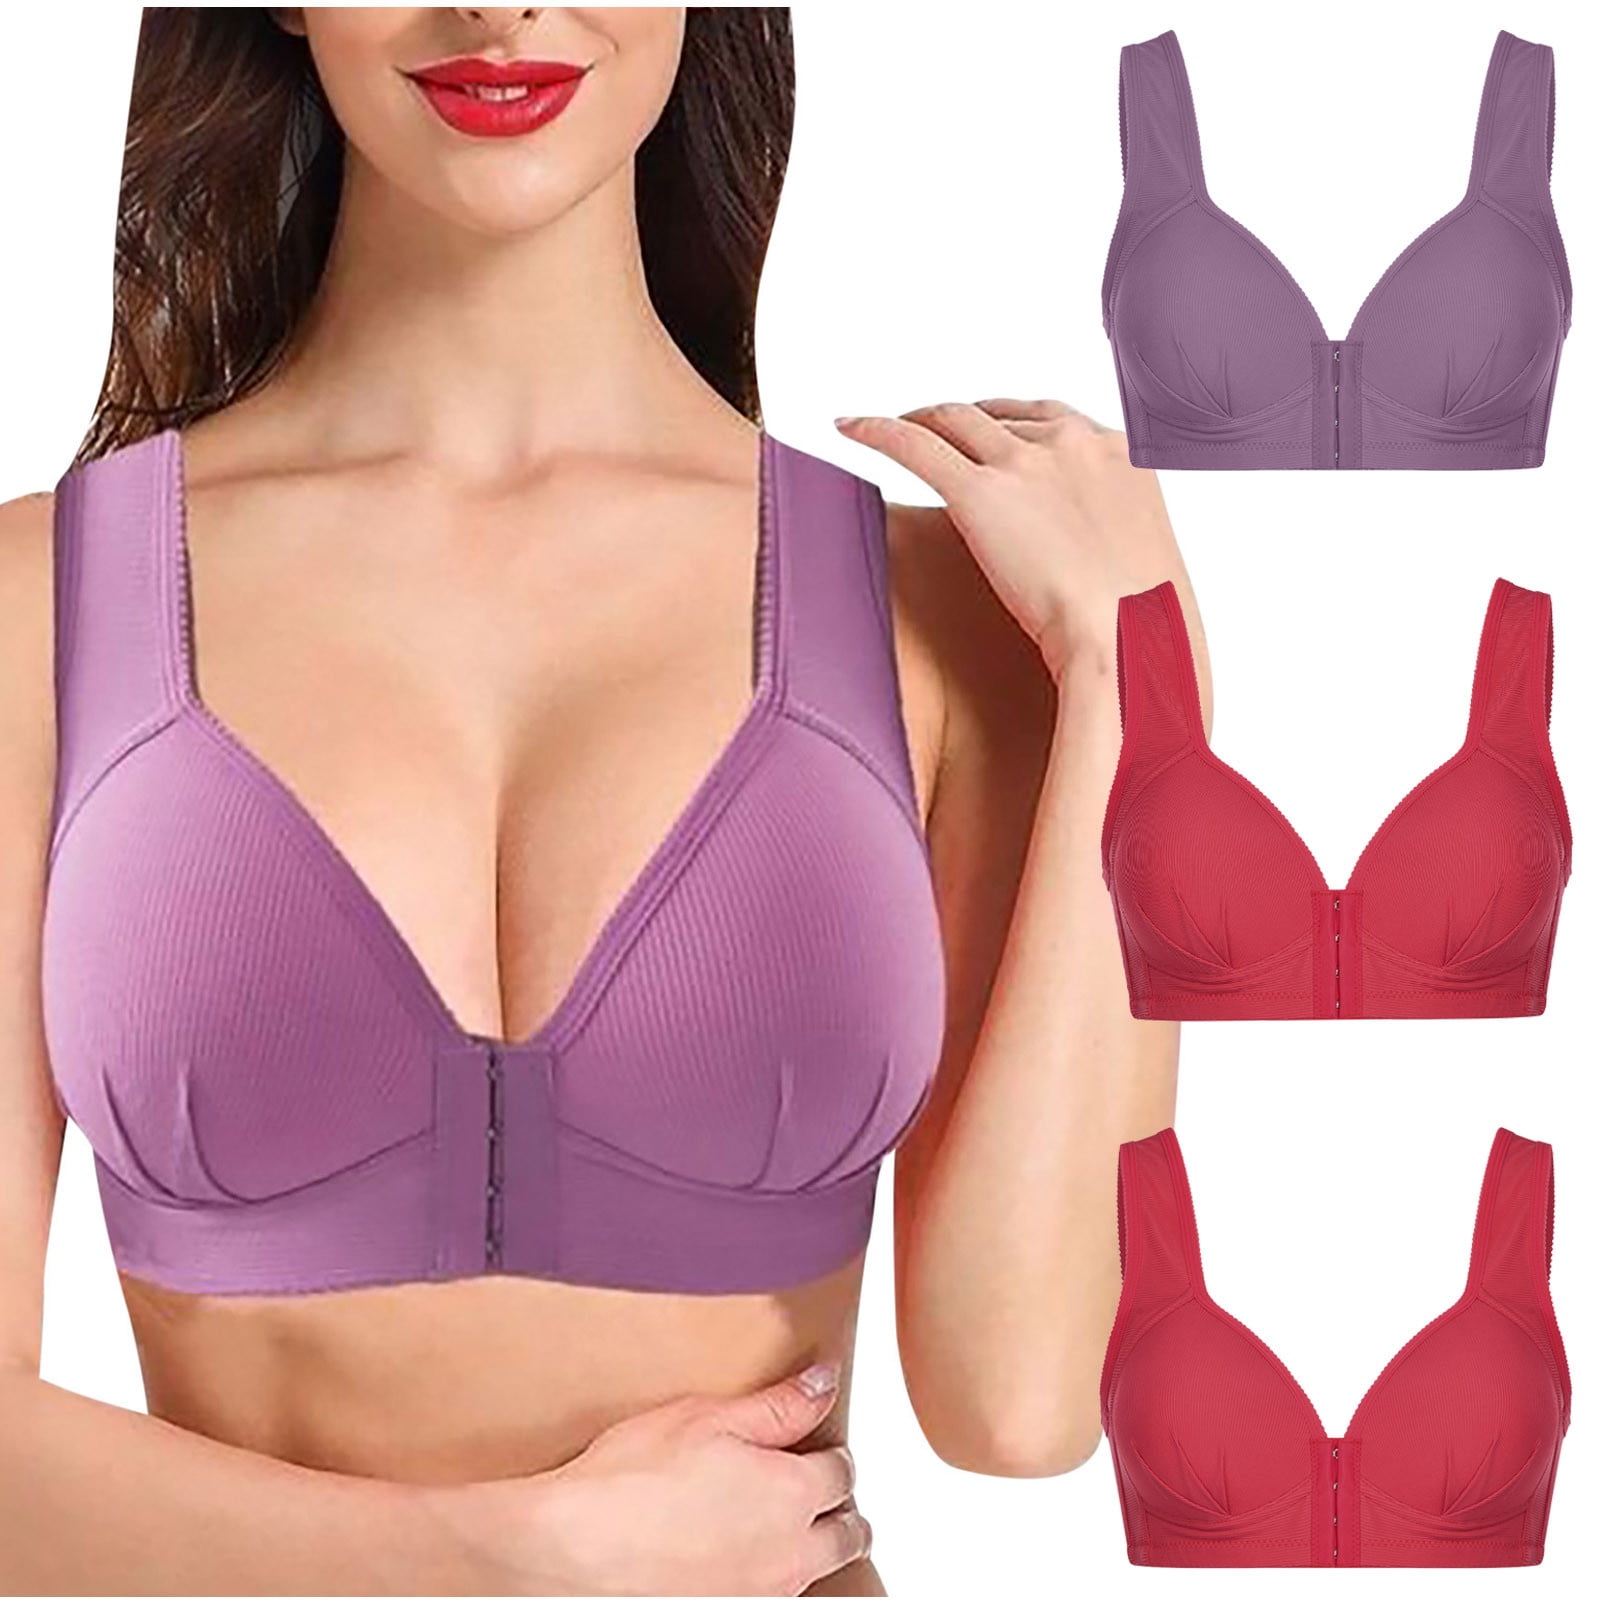 Meichang Strapless Bras for Women Wirefree Support T-shirt Bras